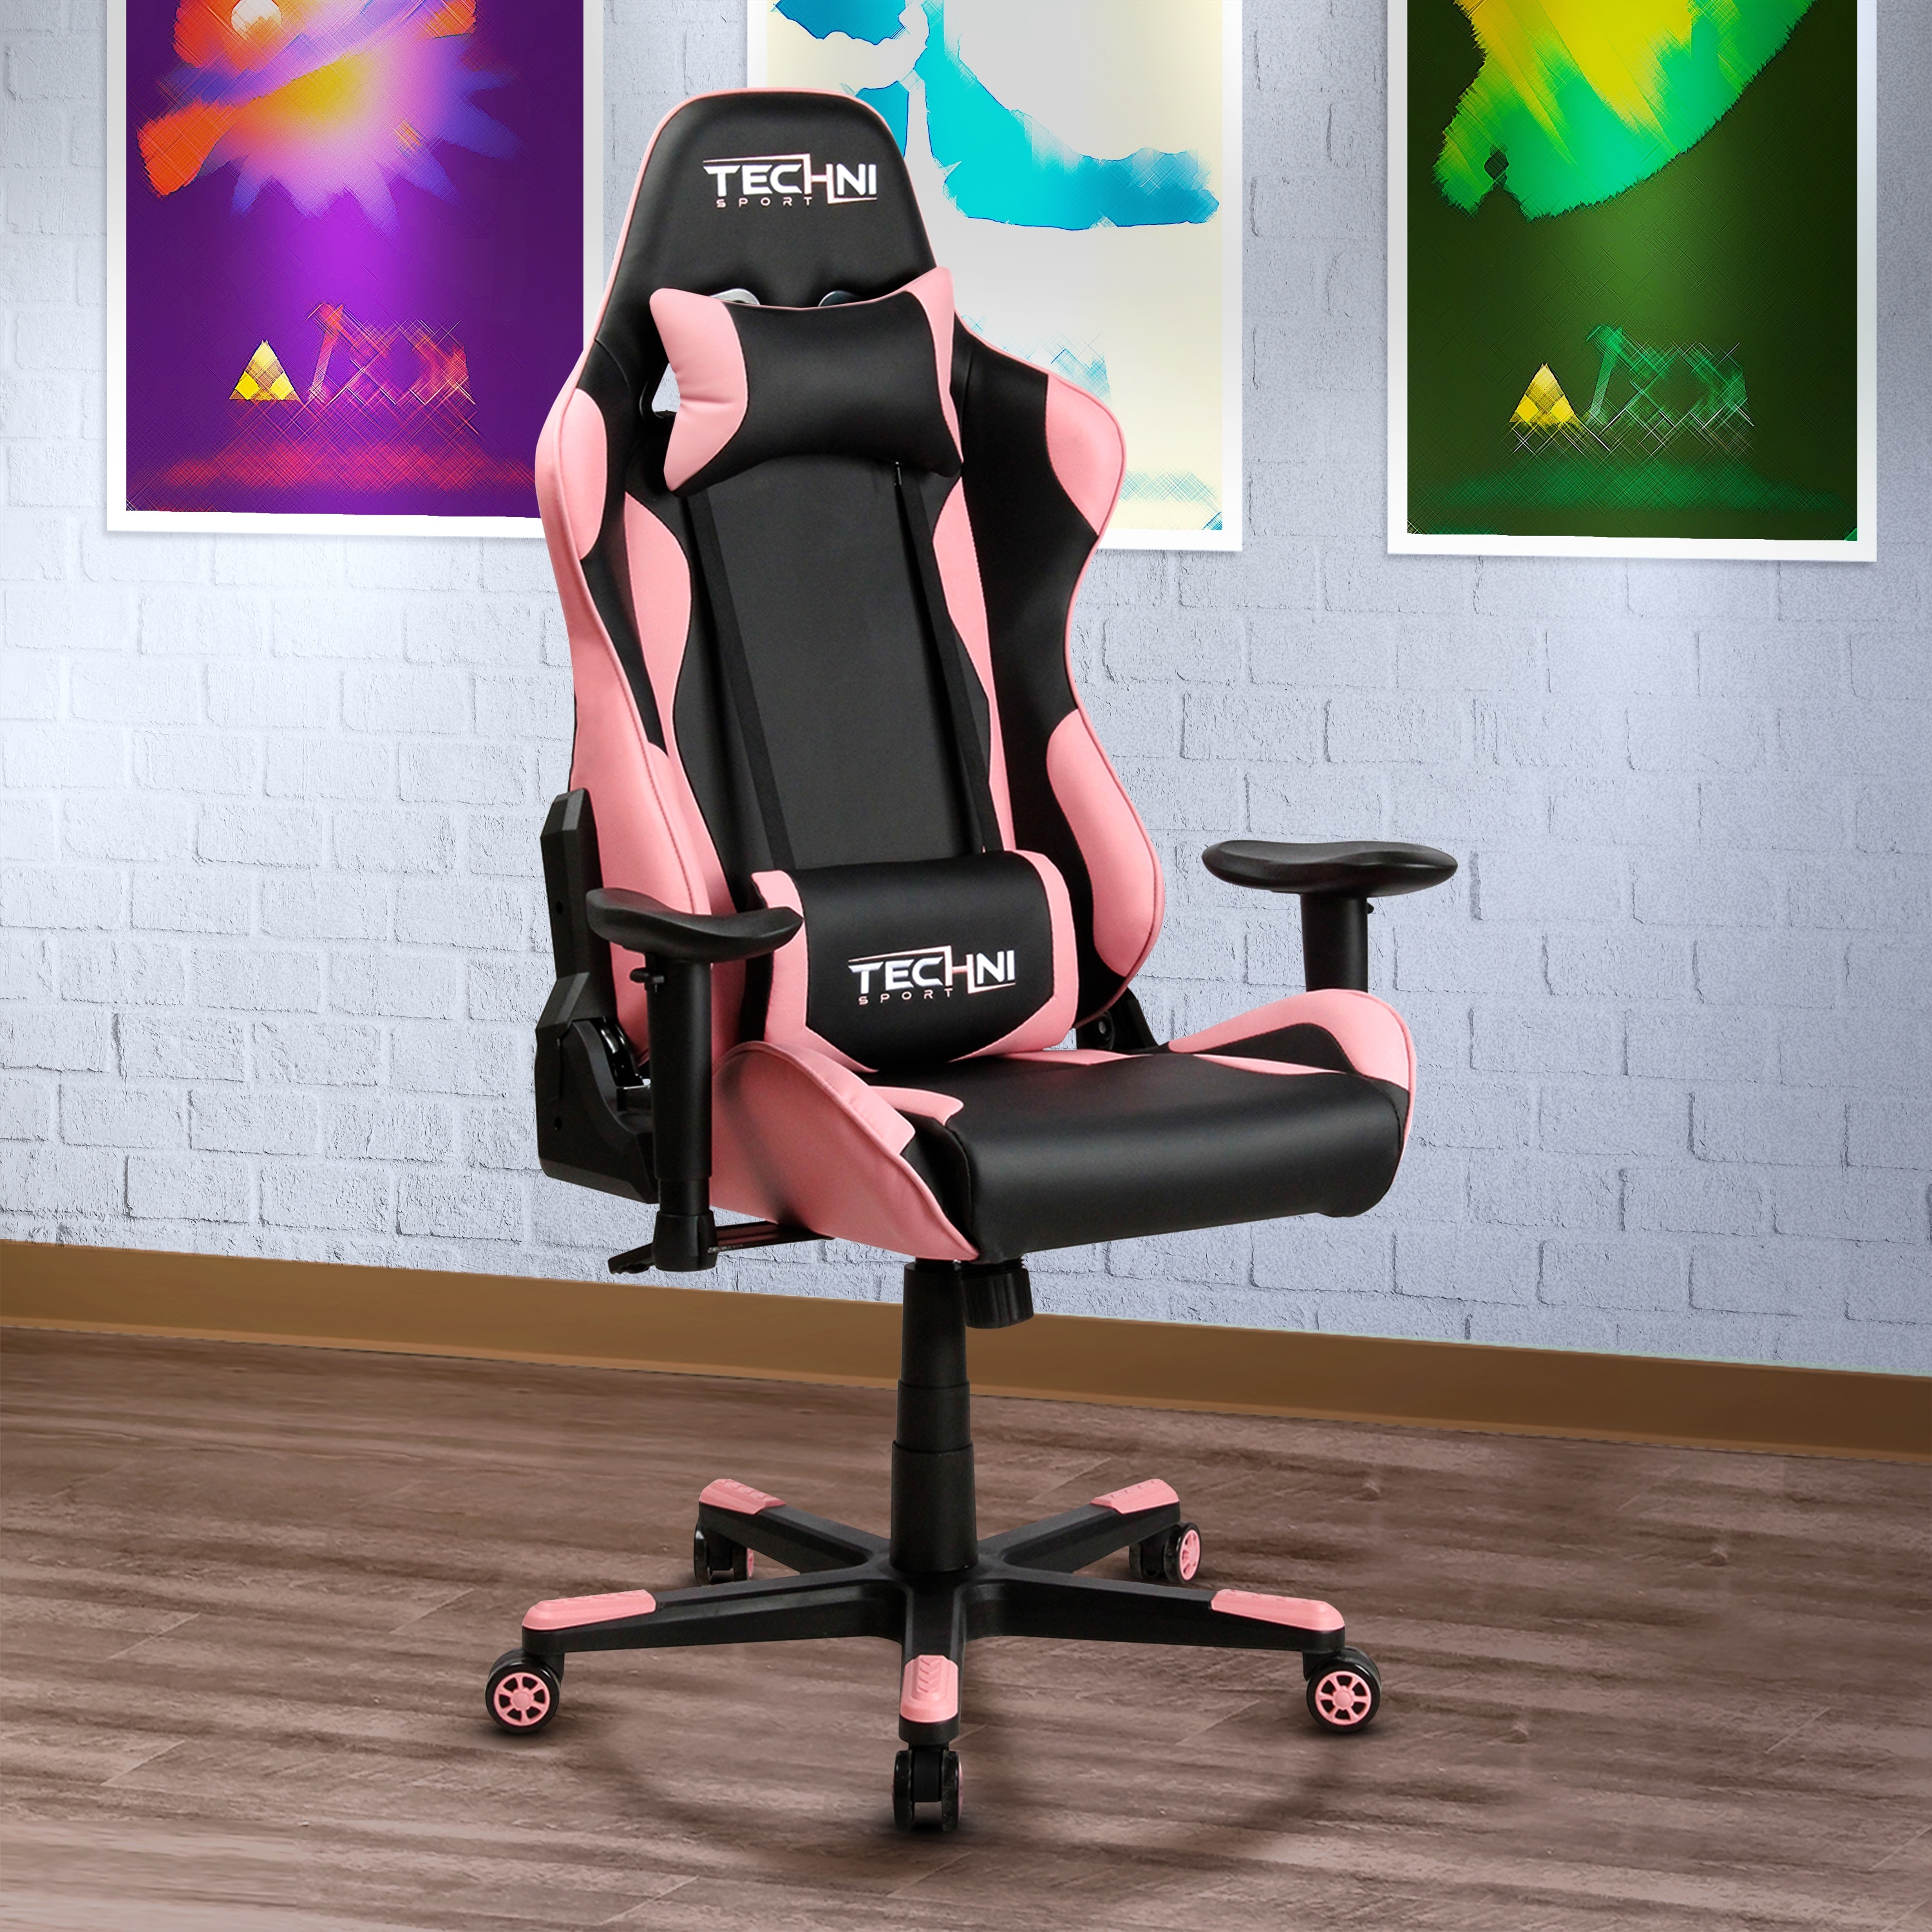 https://ak1.ostkcdn.com/images/products/is/images/direct/4ba3d6eb67ac87ba347213e78df6dda3ff0733a0/Height-Adjustable-Ergonomic-High-Back-Racer-Style-PC-Gaming-Chair-with-Removable-Head-Rest-Pillow-and-Lumbar-Cushion.jpg